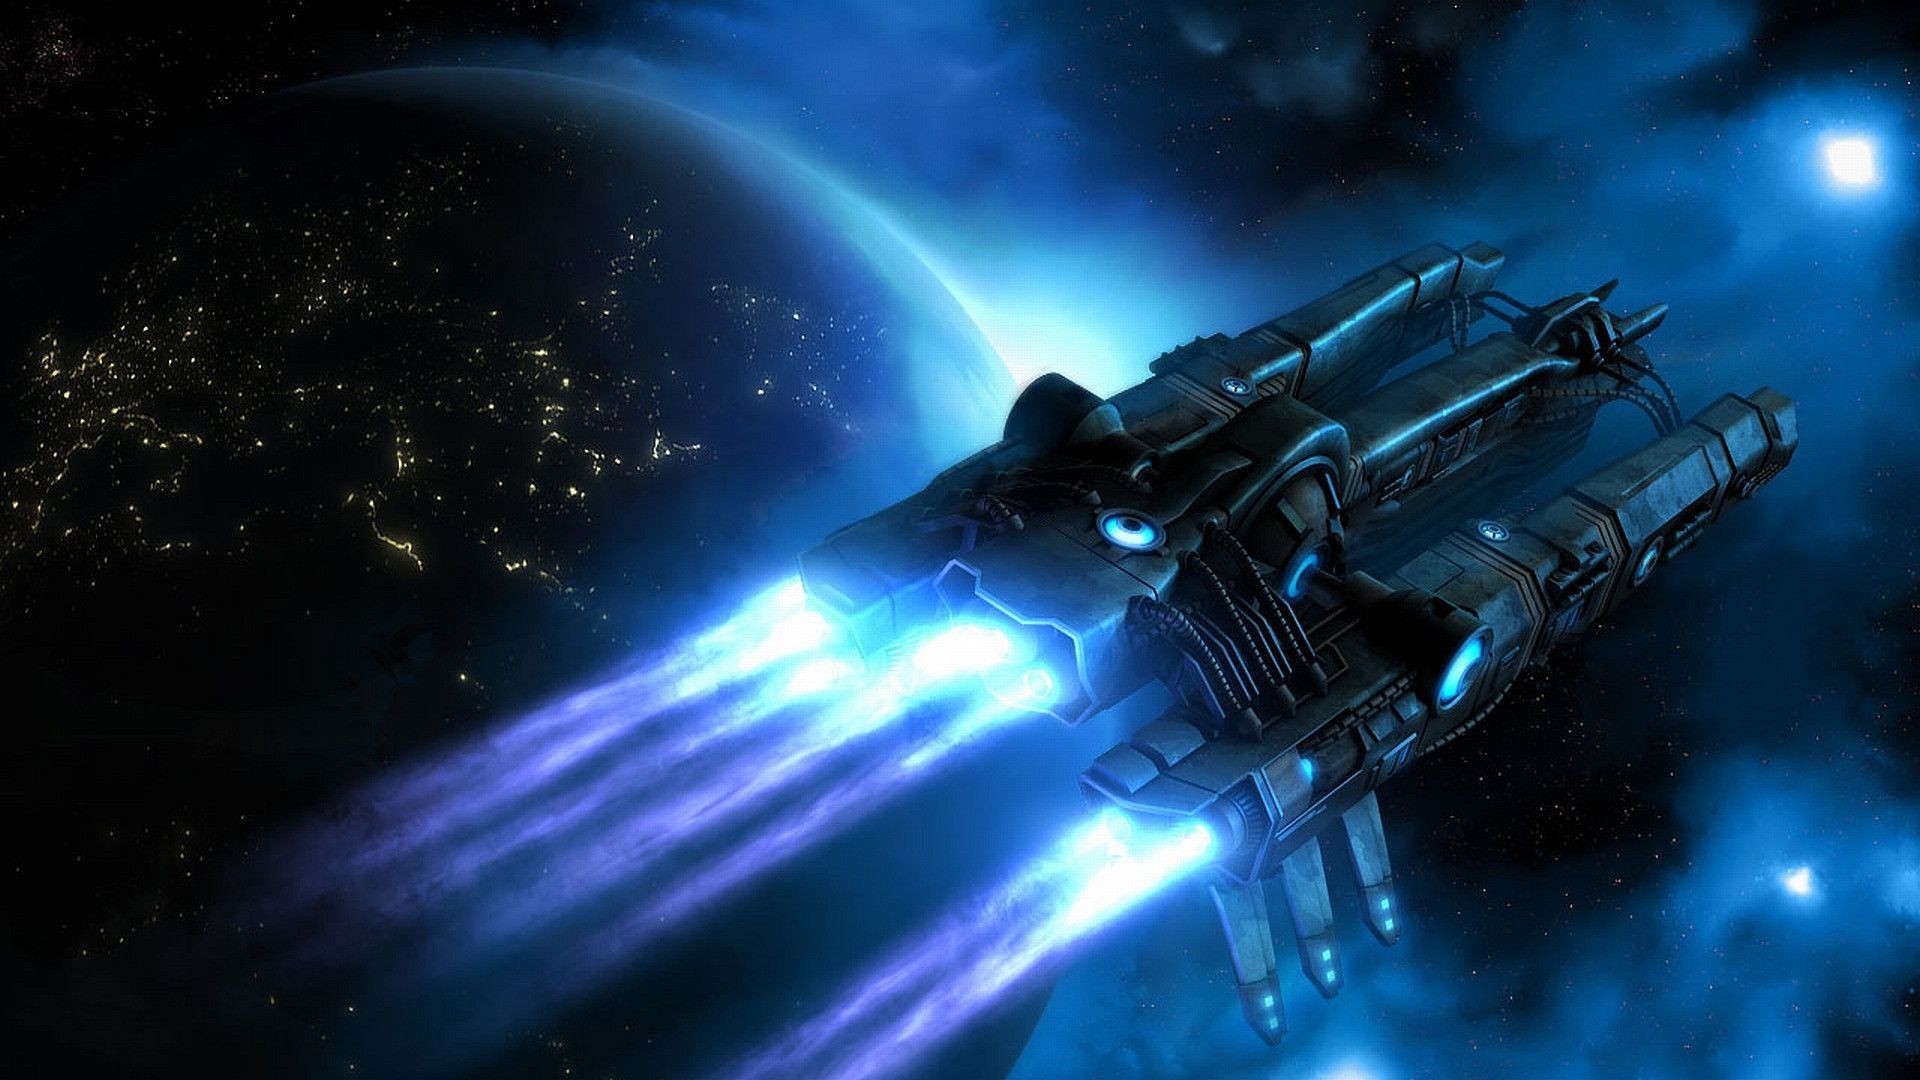 1920x1080 Spaceship Backgrounds - Wallpaper Cave